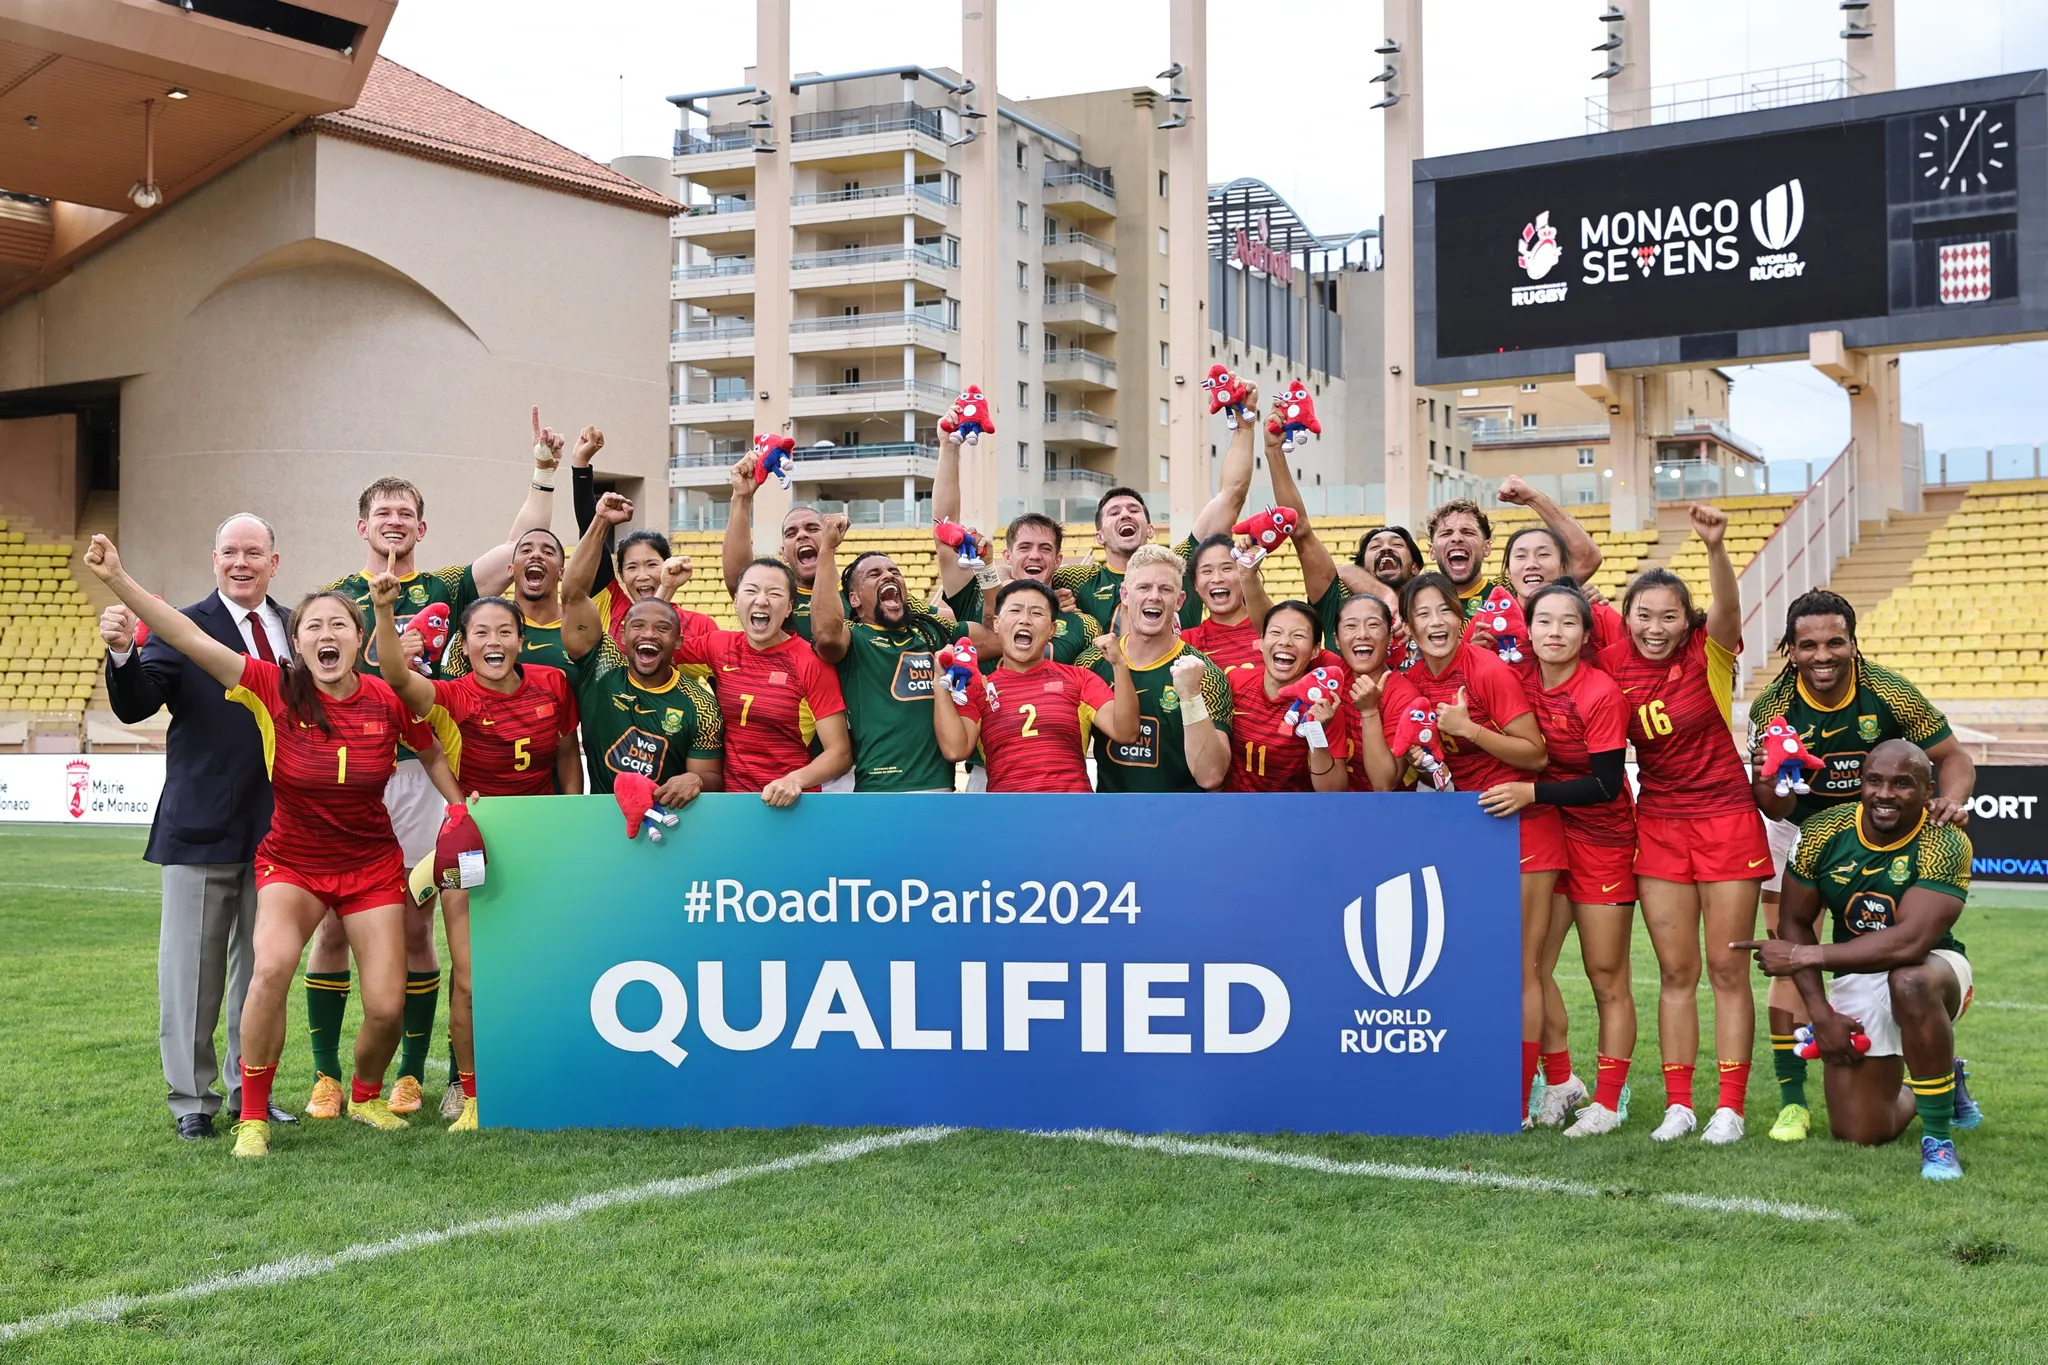 Players from China and South Africa celebrate after securing women's and men's qualification, respectively, in rugby sevens for the 2024 Summer Olympics at the World Rugby Sevens Repechage in Monaco, June 23, 2024. /World Rugby